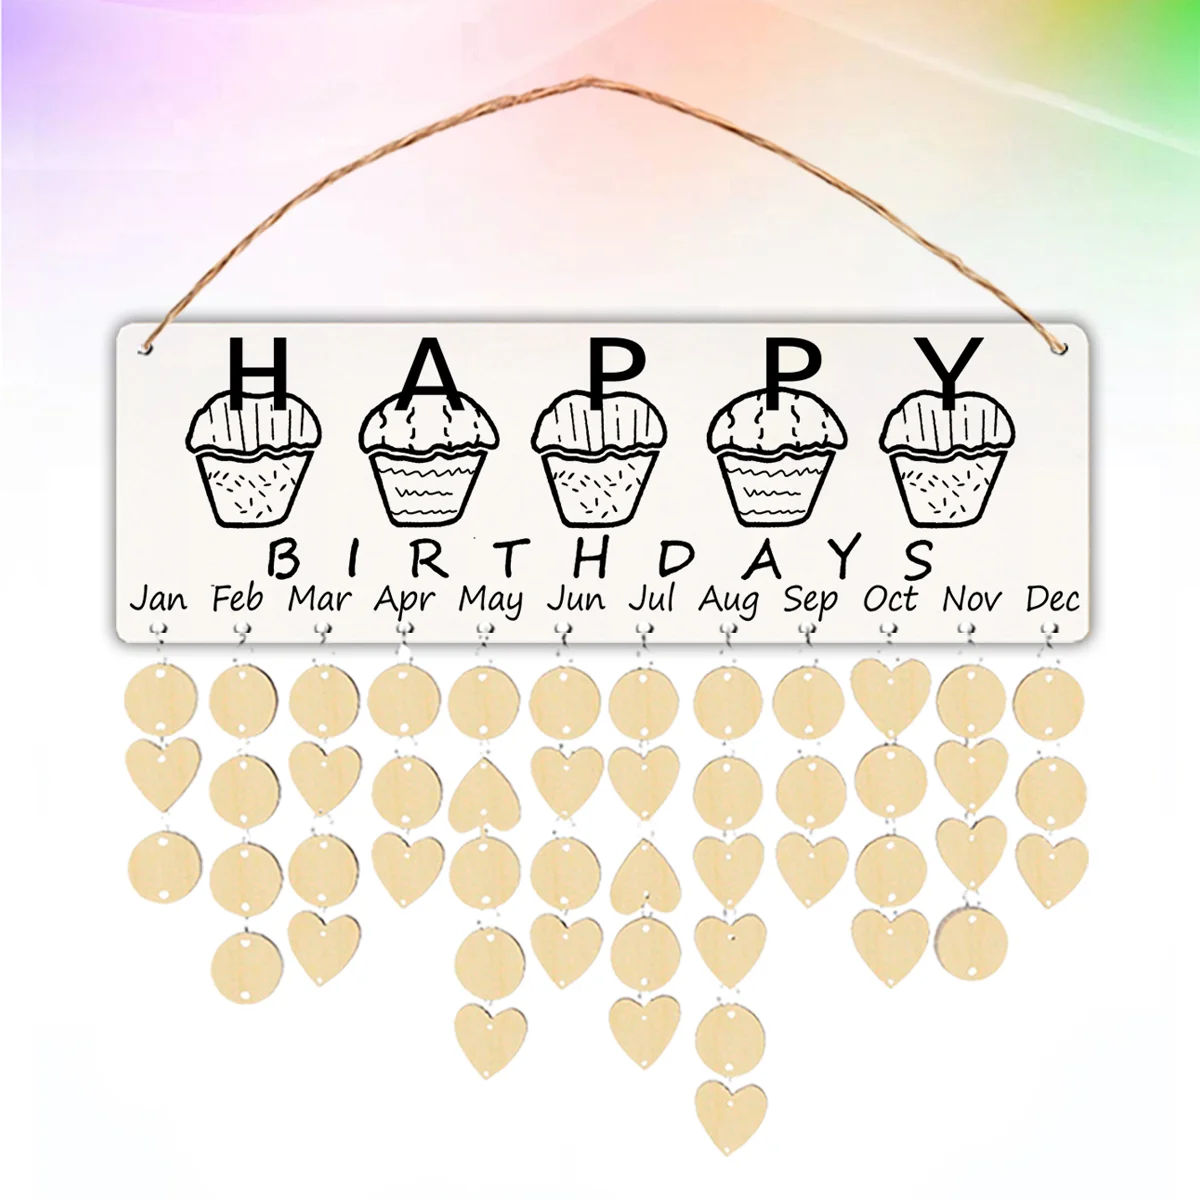 Wooden Birthday Reminder Board DIY Dates Reminder Sign Rope Hanging Events Anniversary Celebration Calendar Wall Plaque with yellow whiteplastic merchandise sign clip with erasable board rotatable pop clip on holder price display stand